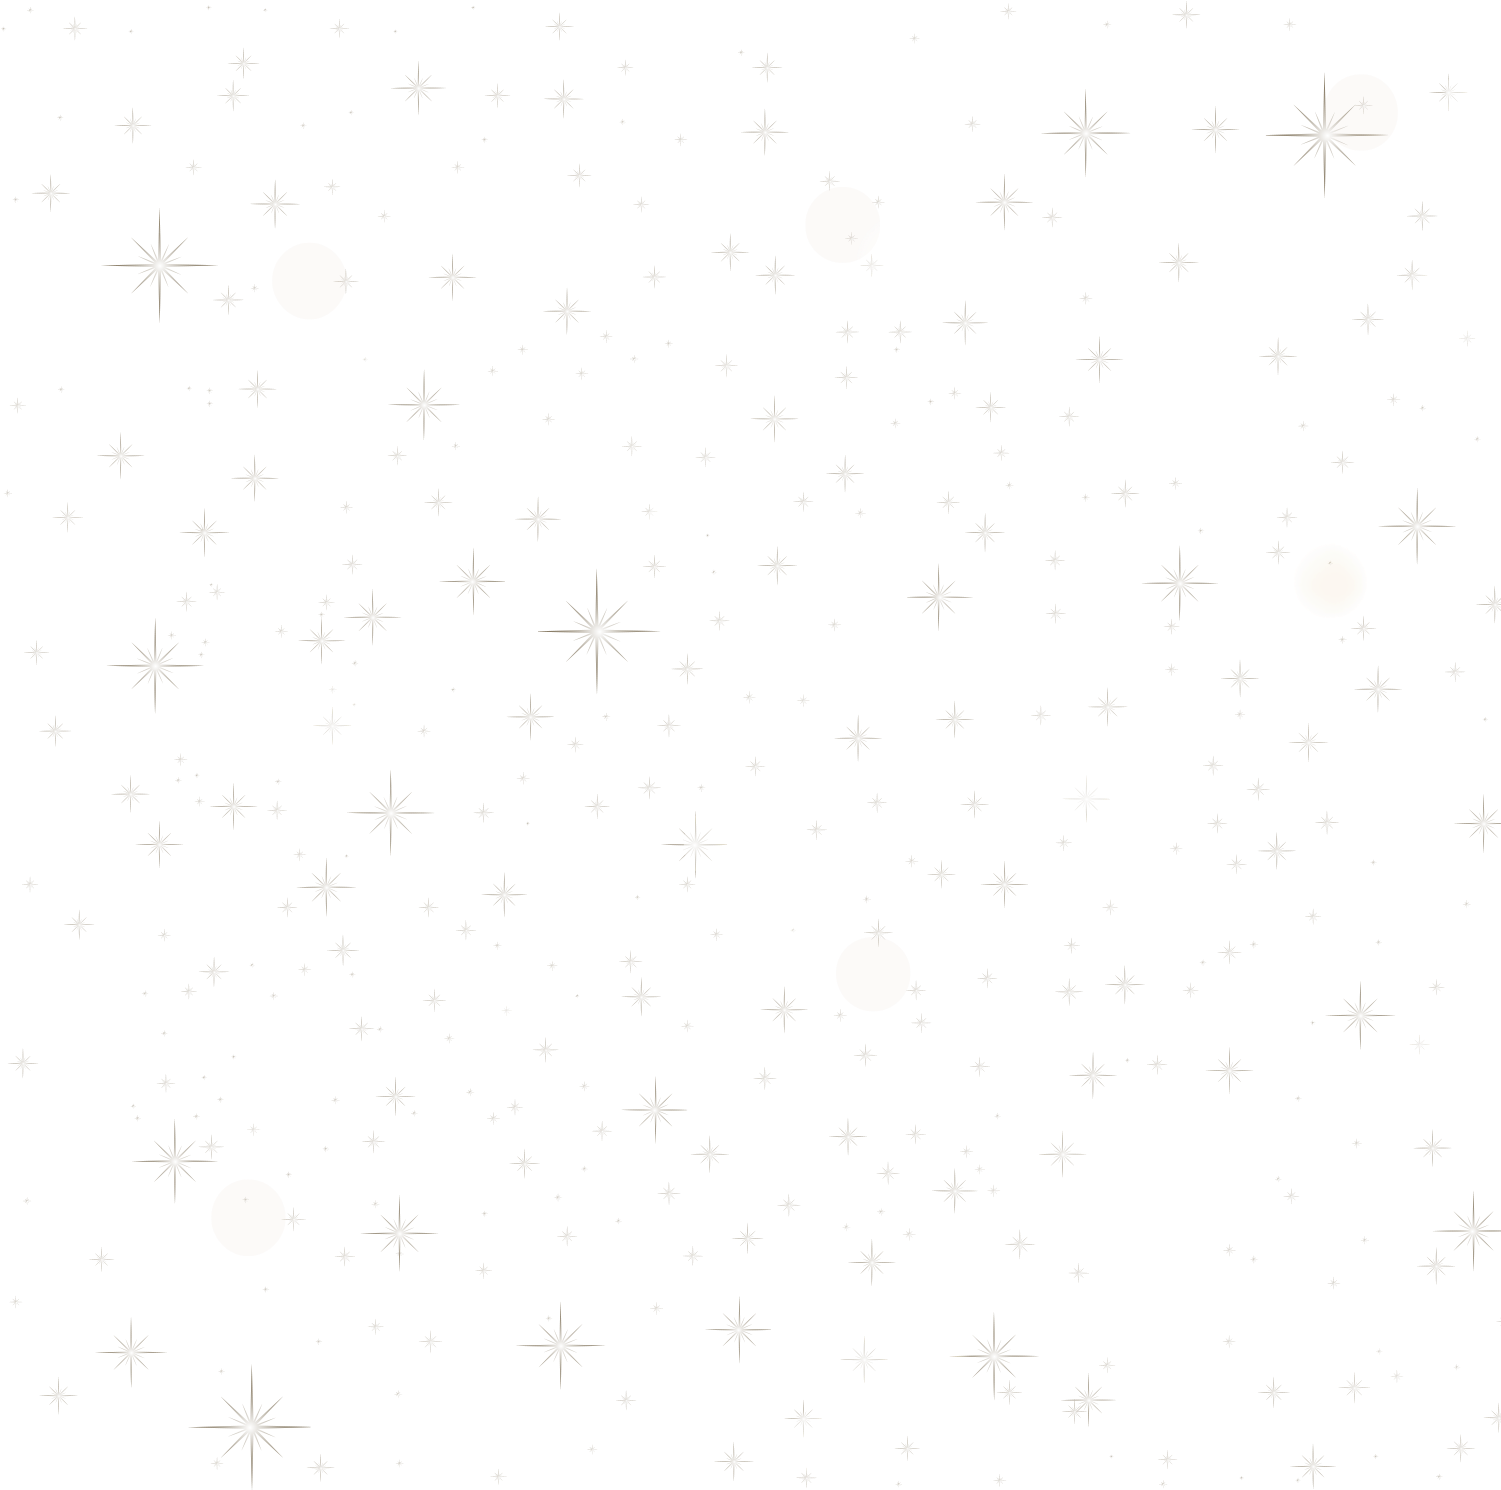 A Black Background With White Circles And Stars